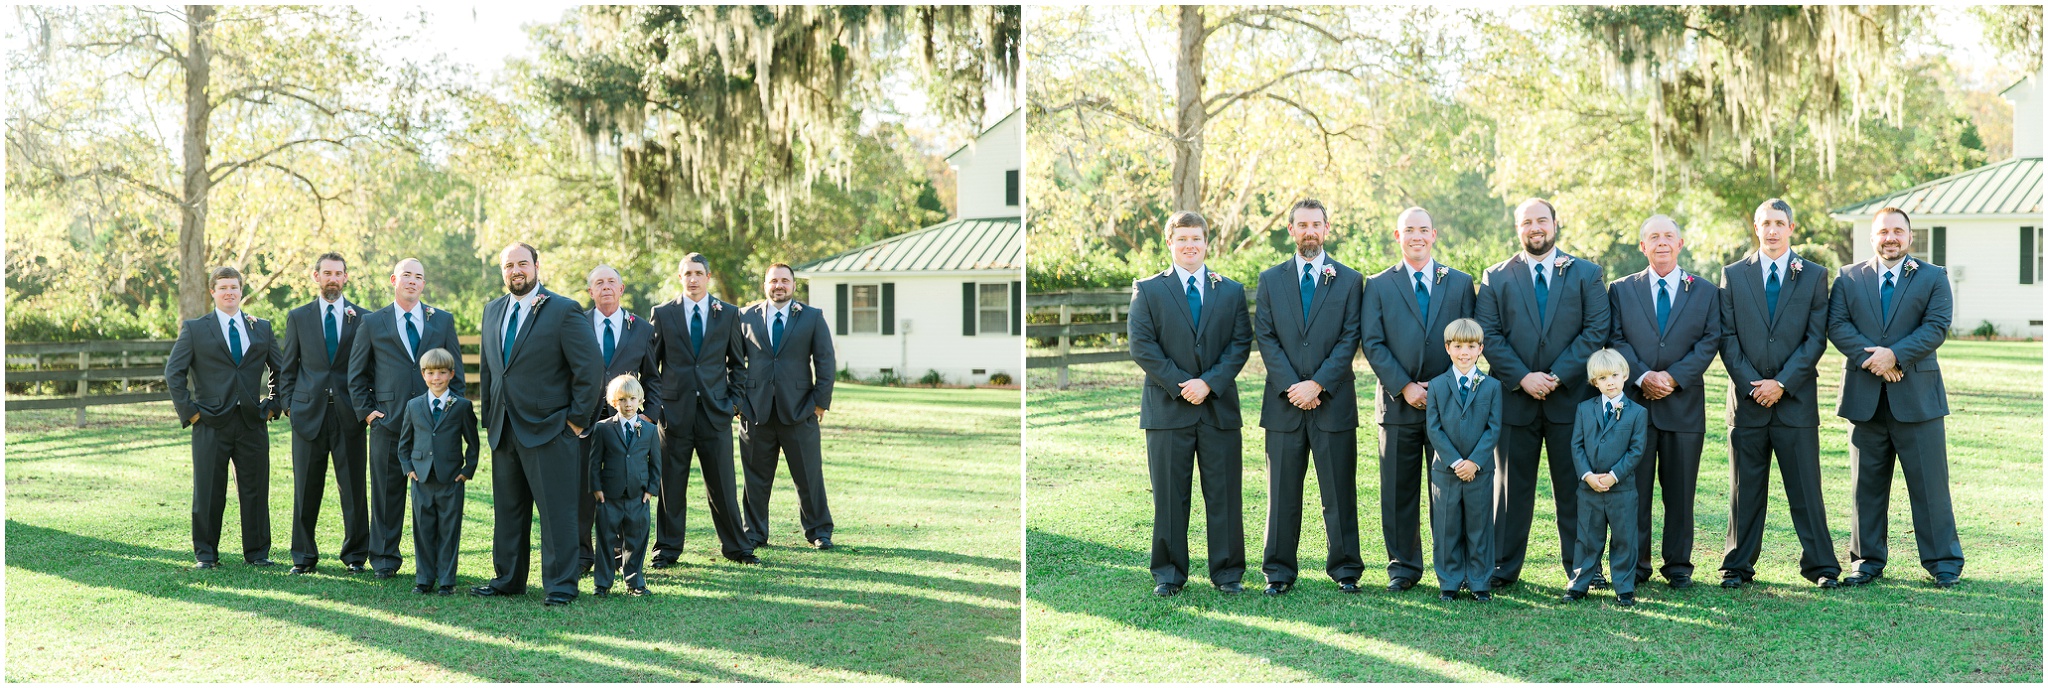 Dorsey, his groomsmen and his ring bearers posing in a group on the lawn, Upper Mill Plantation Wedding Session 9, Conway, South Carolina, Wedding coordinator, flowers and Cake - Willow Event Designs, Venue - Upper Mill Plantation, DJ - Carolina Entertainment, Dress - Foxy Lady, www.onelifephoto.net Photography